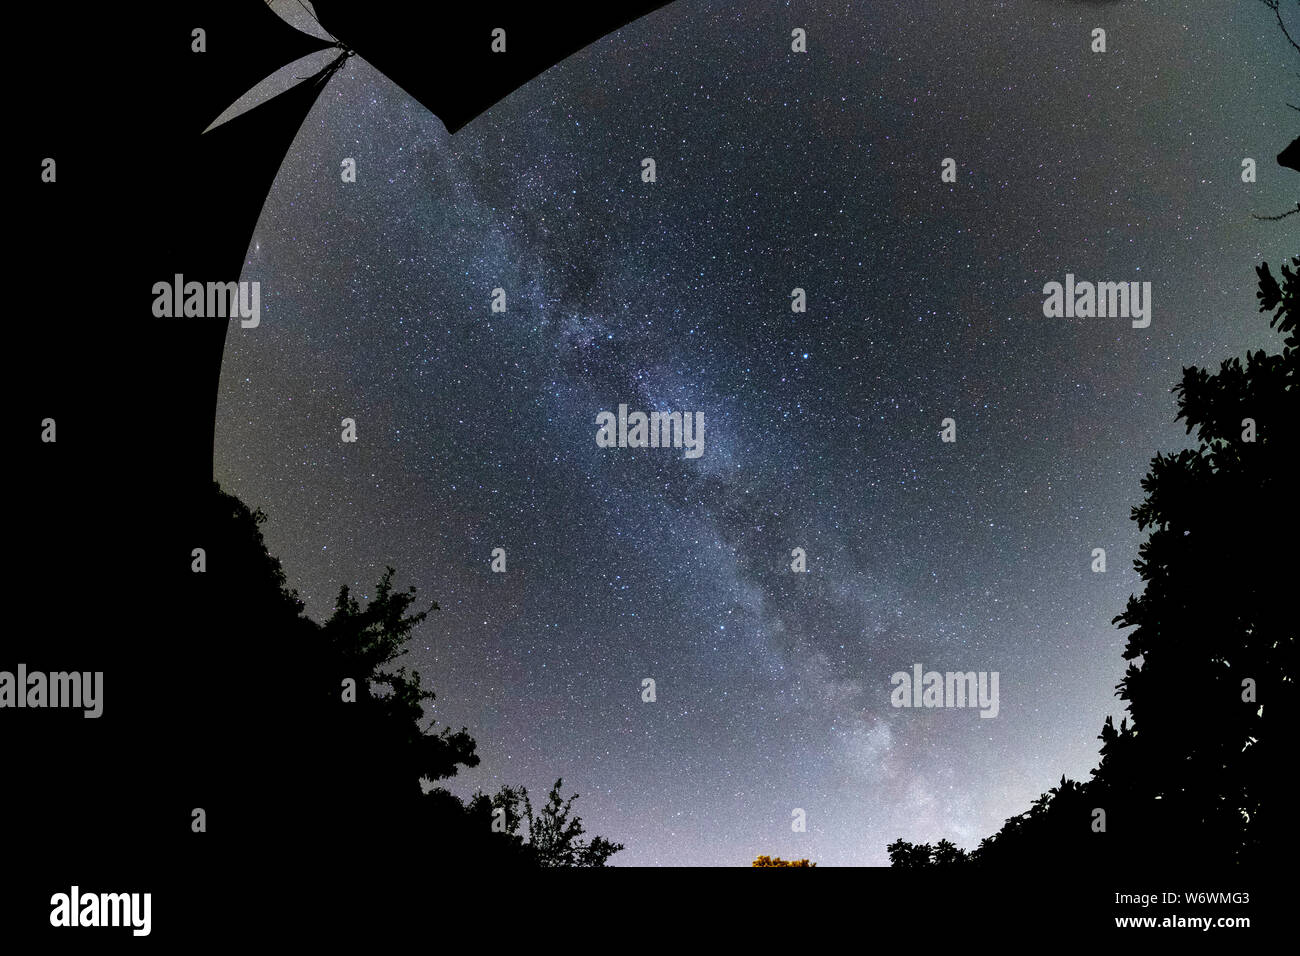 Sablet, The Vaucluse, France. 3rd August 2019. Clear dark skies in southern France show the Milky Way appearing brightly in the night sky above the garden of a village house. Credit: Malcolm Park/Alamy Live News. Stock Photo